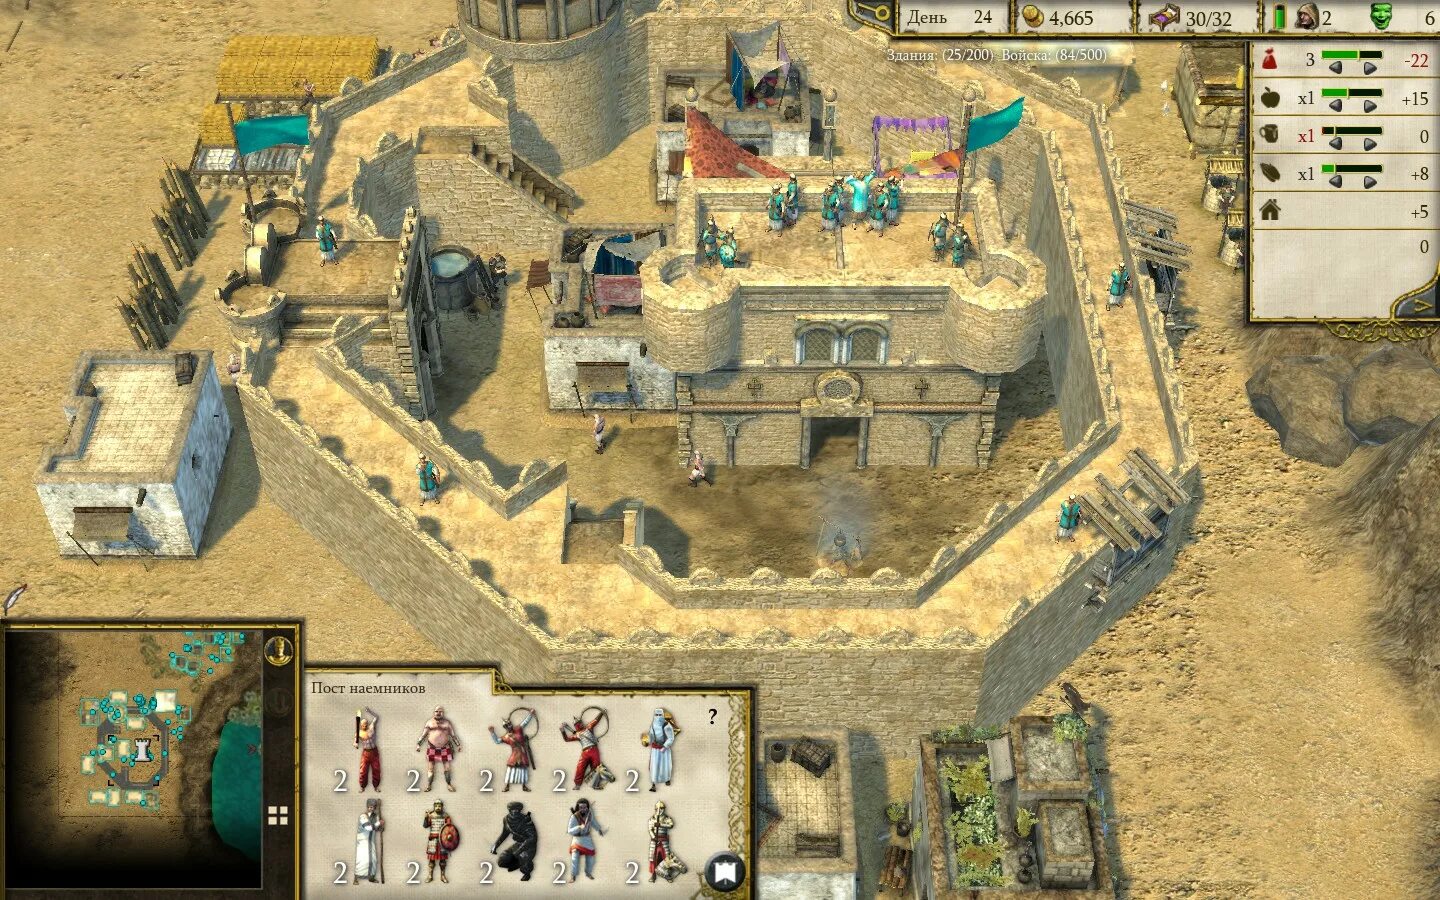 Stronghold: Definitive Edition. Стронгхолд Европа. Stronghold Crusader Europe. Stronghold Crusader моды Russian story.